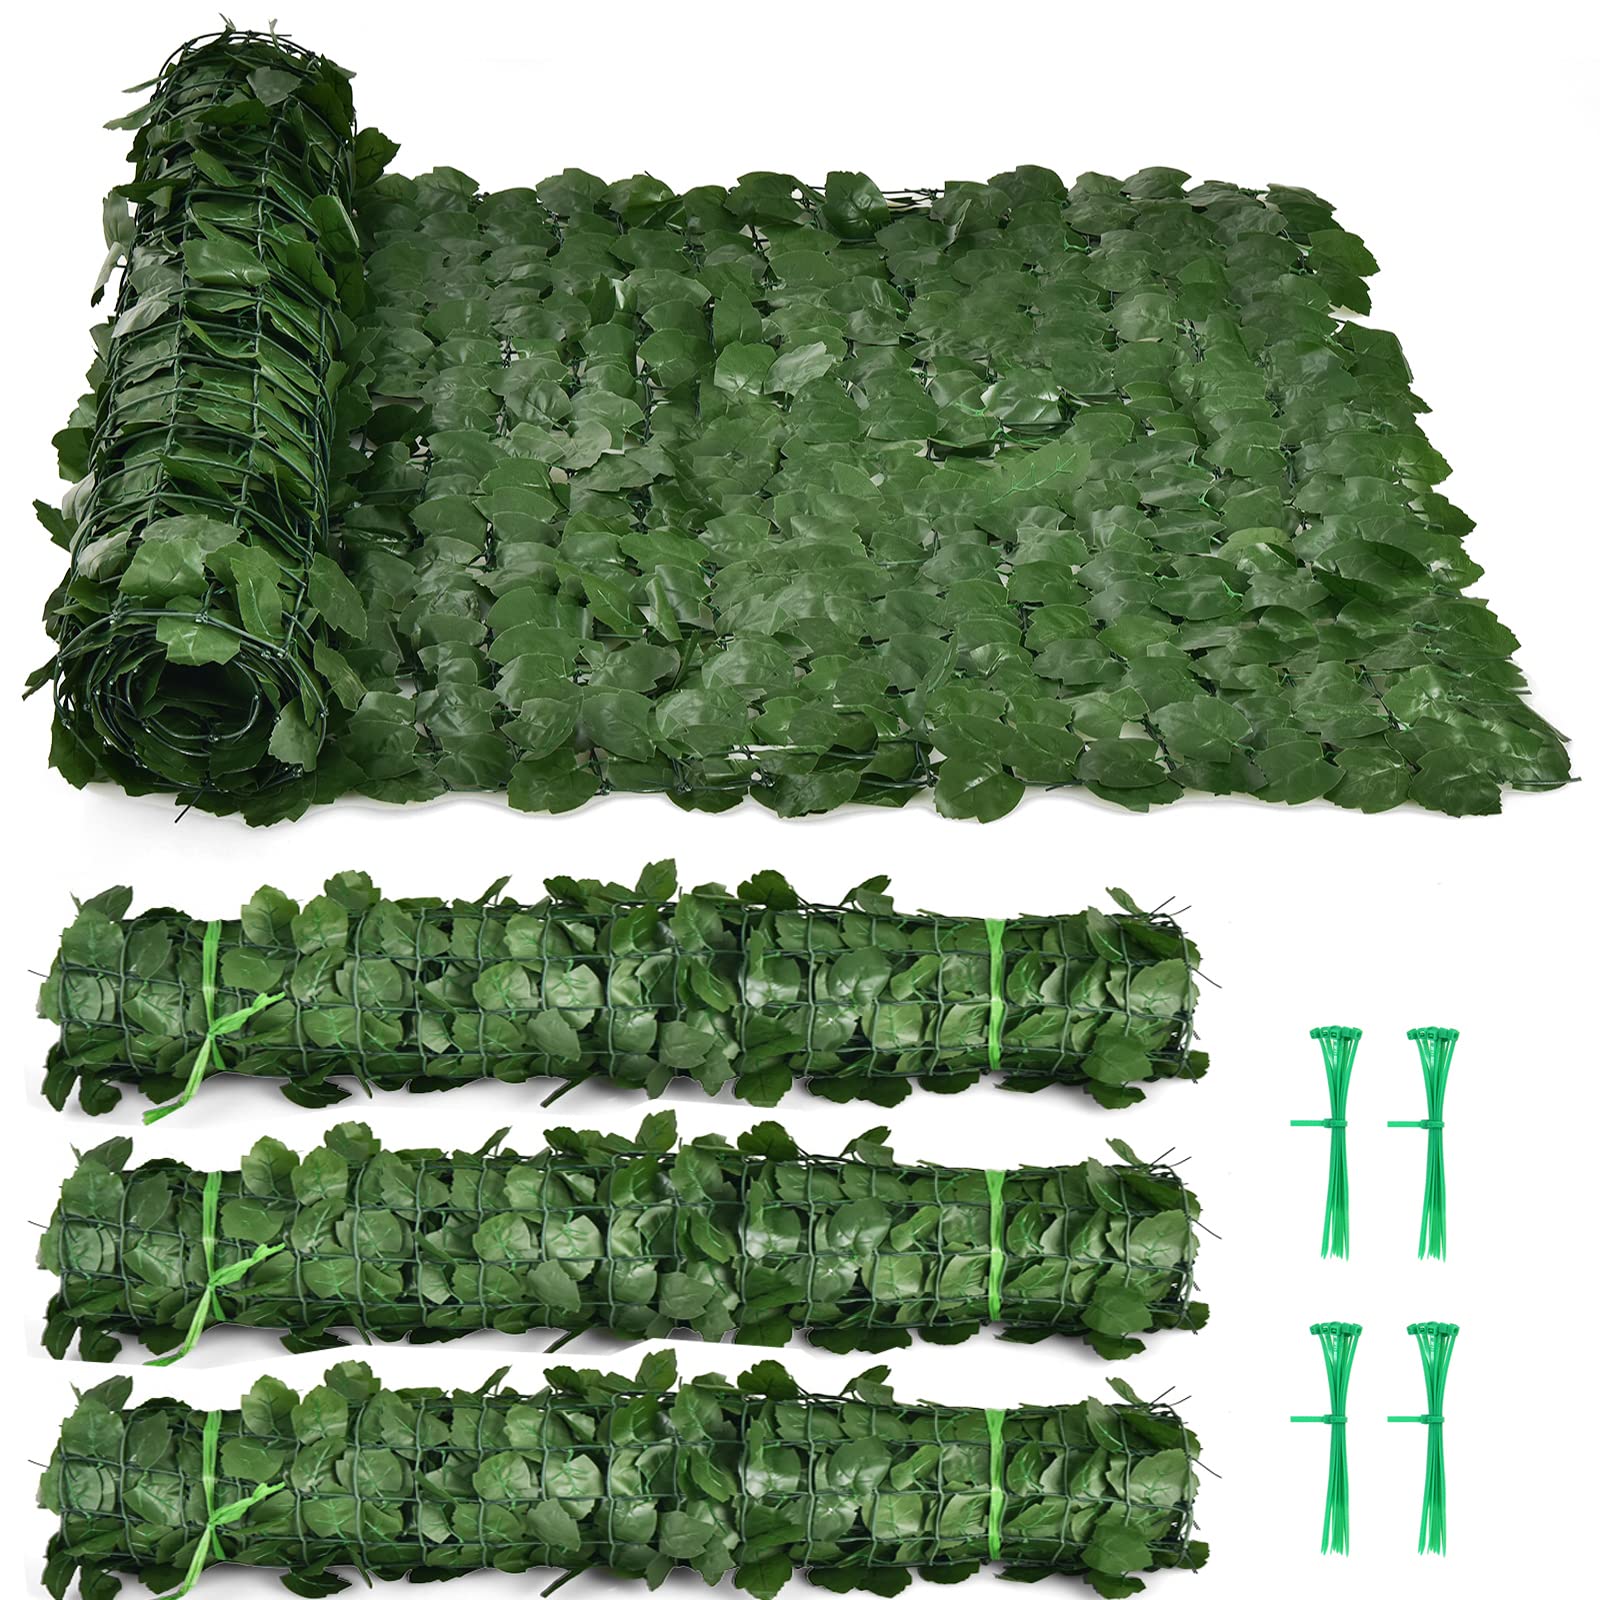 Giantex 118" x 39.4" Artificial Hedges Fence Faux Ivy Vine Greenery Wall